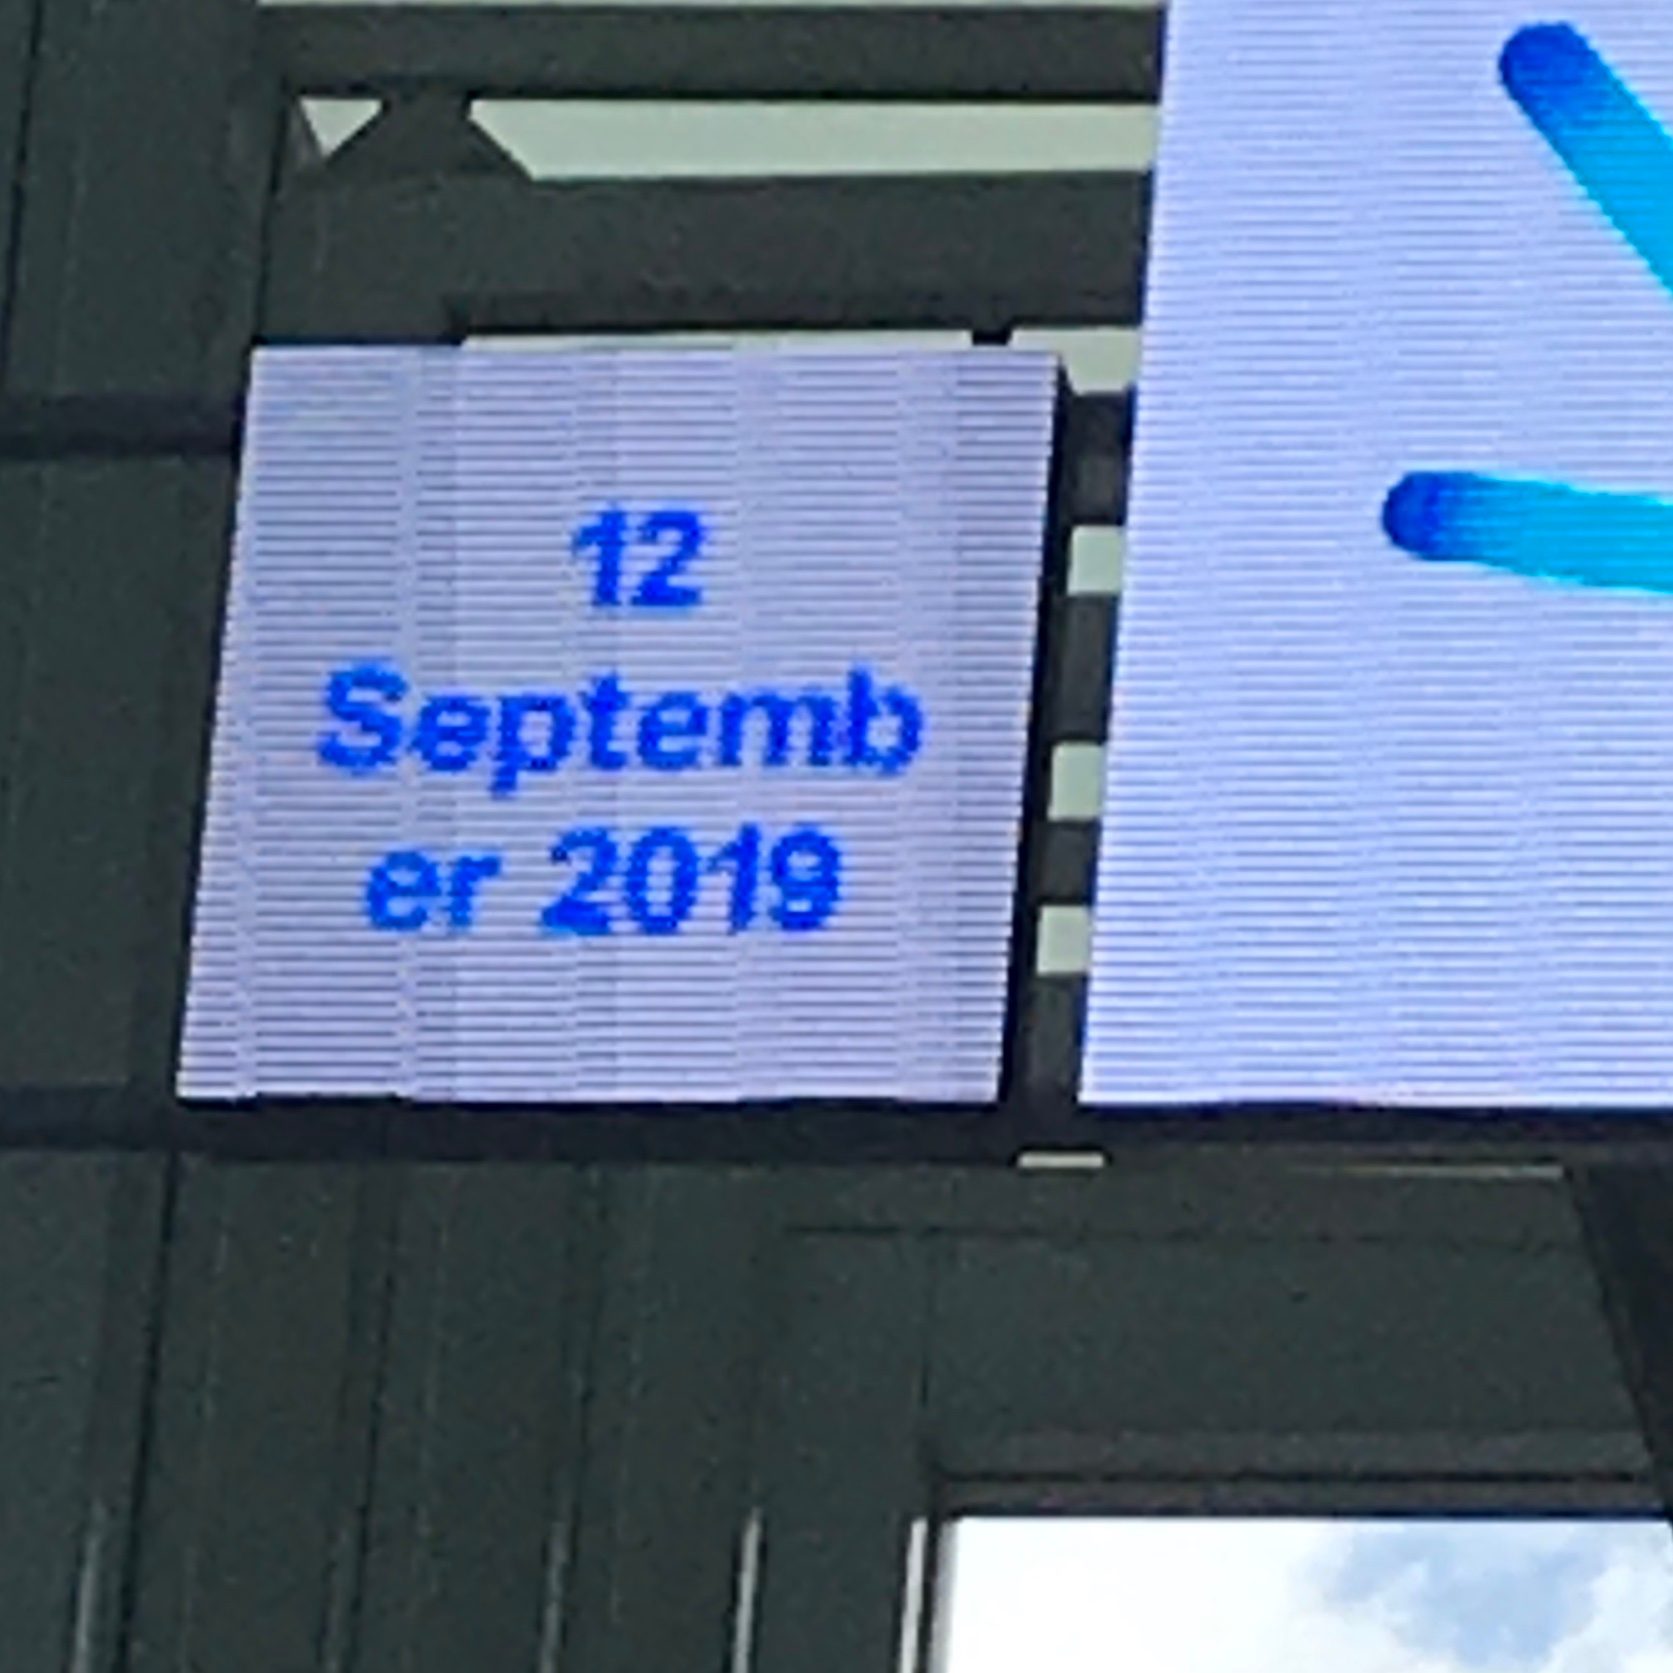 Electronic date display with a line break in the month's name.